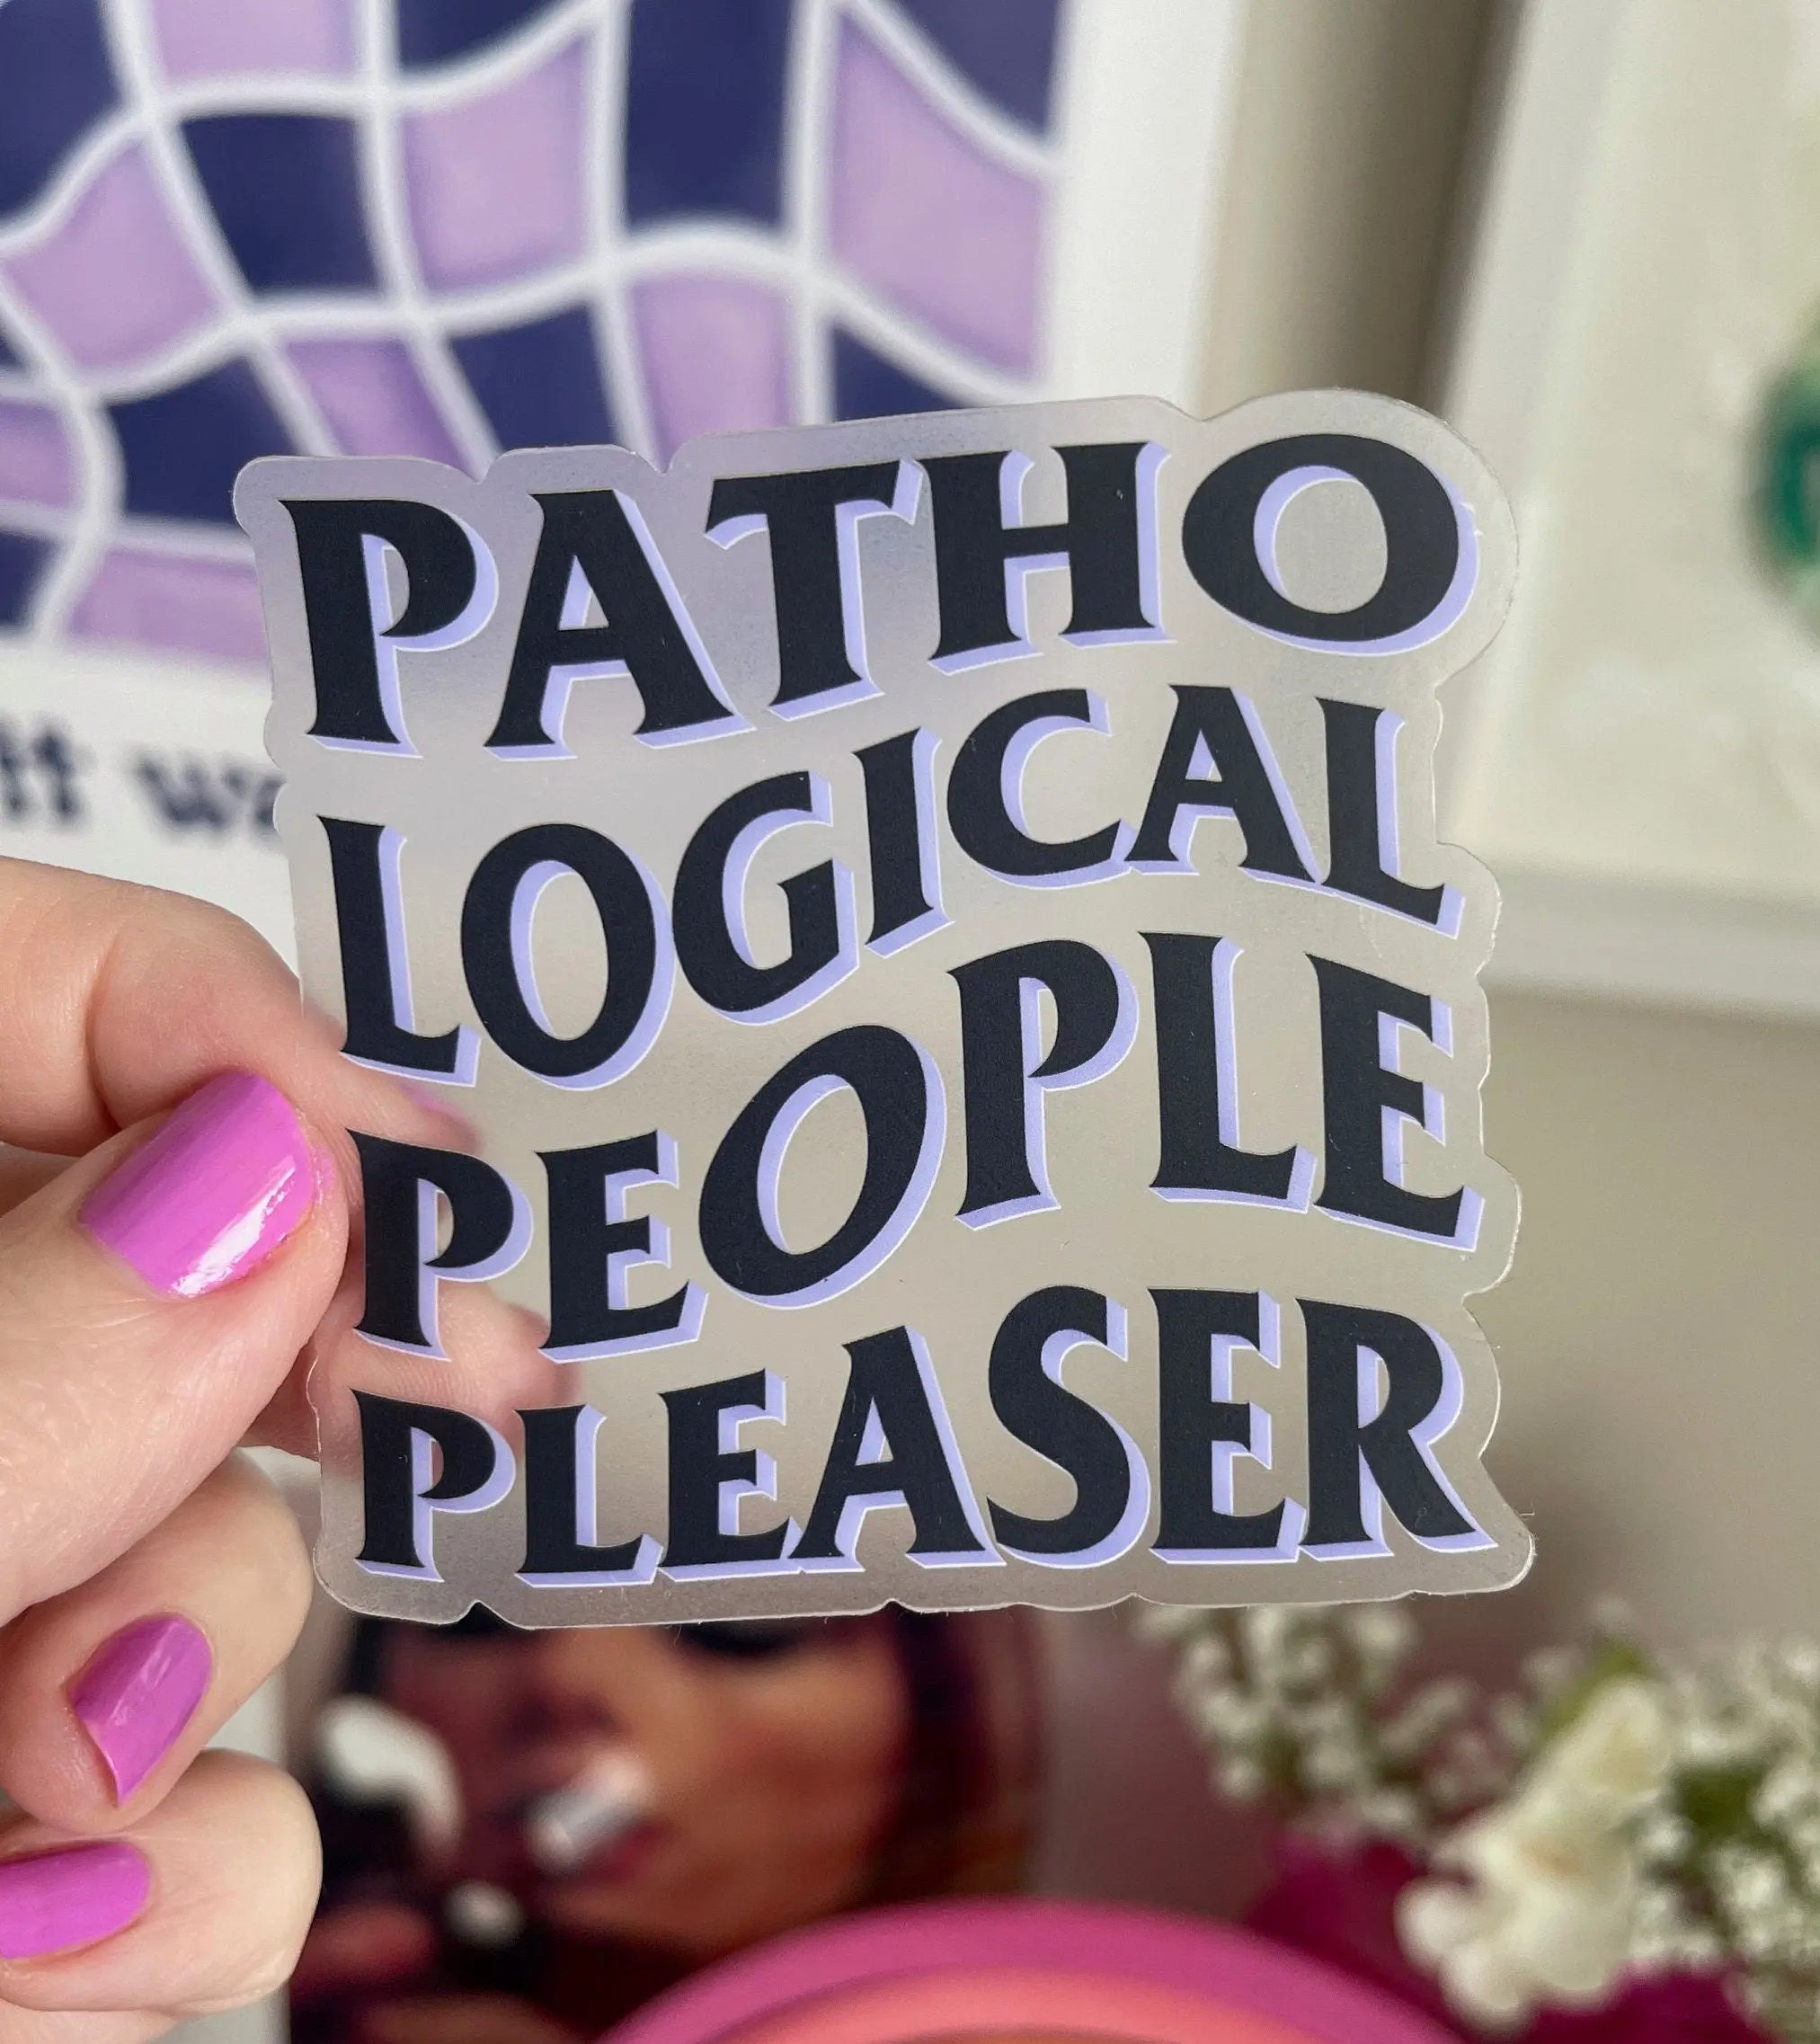 CLEAR Pathological people pleaser sticker MangoIllustrated